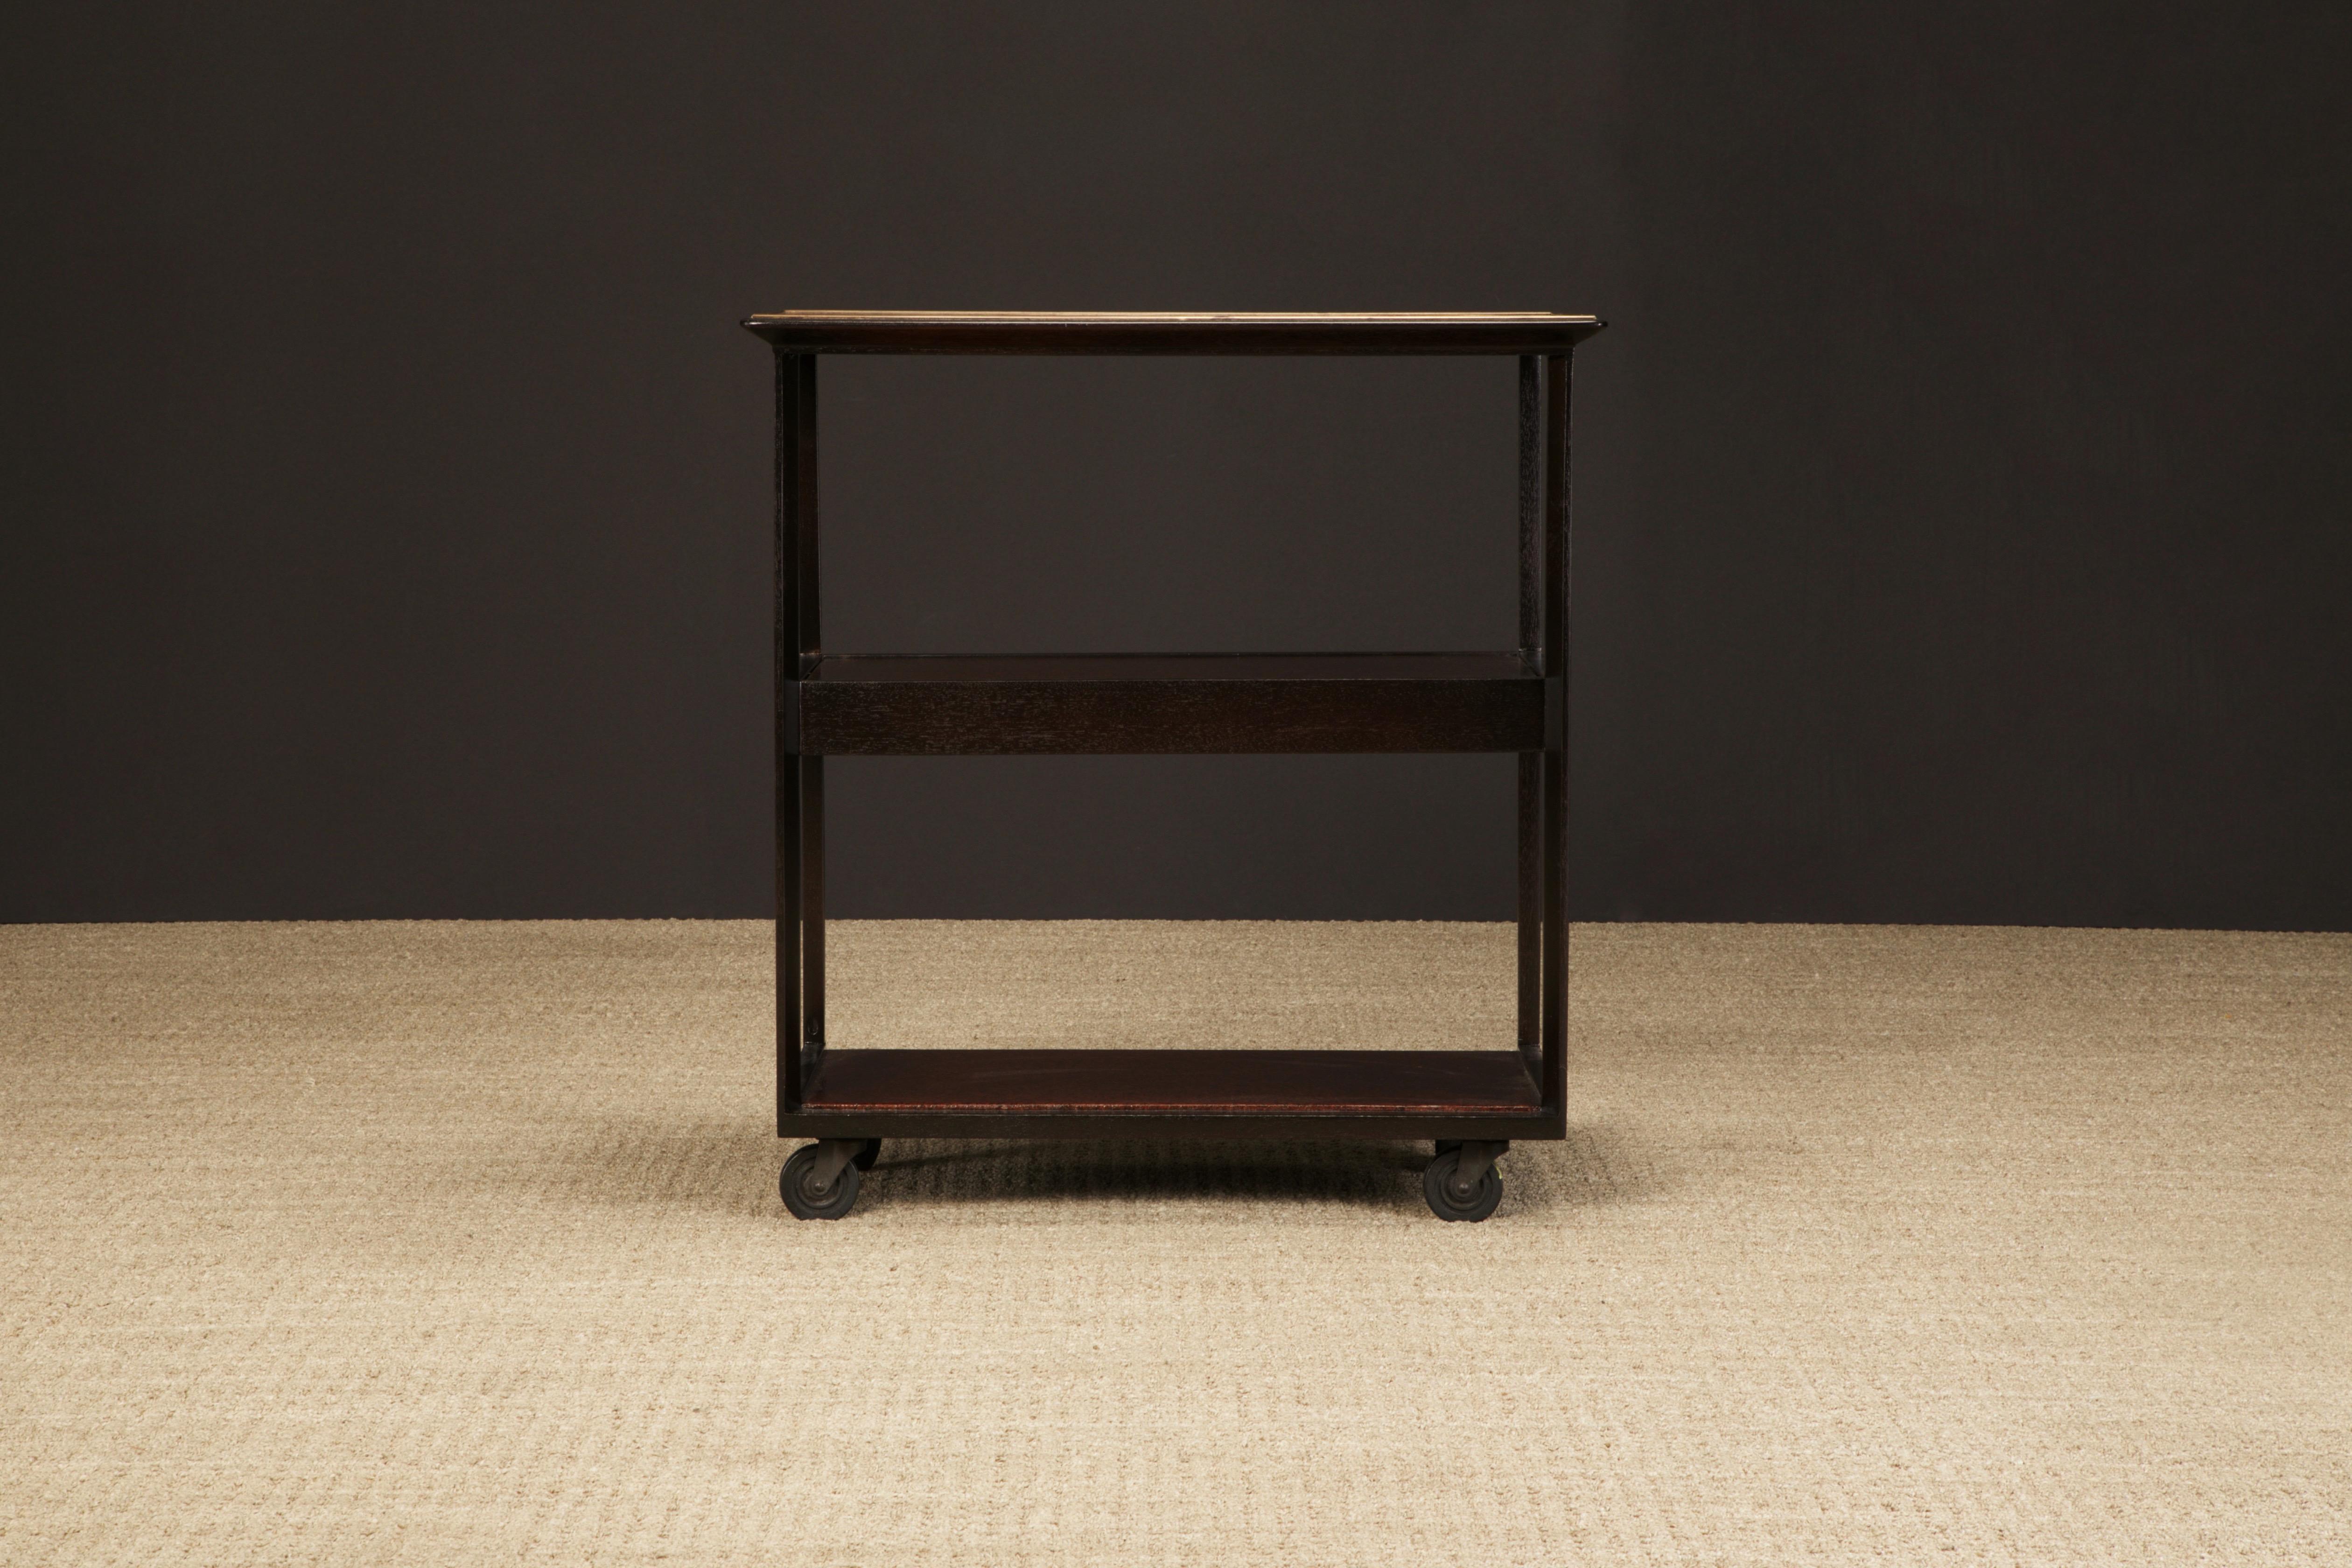 This classic Edward Wormley for Dunbar bar cart, circa 1960s, features a cork top with brass trim and the two lower platforms also with cork, a hidden drawer to stow away your goodies and on casters for ease of relocation. We just completed